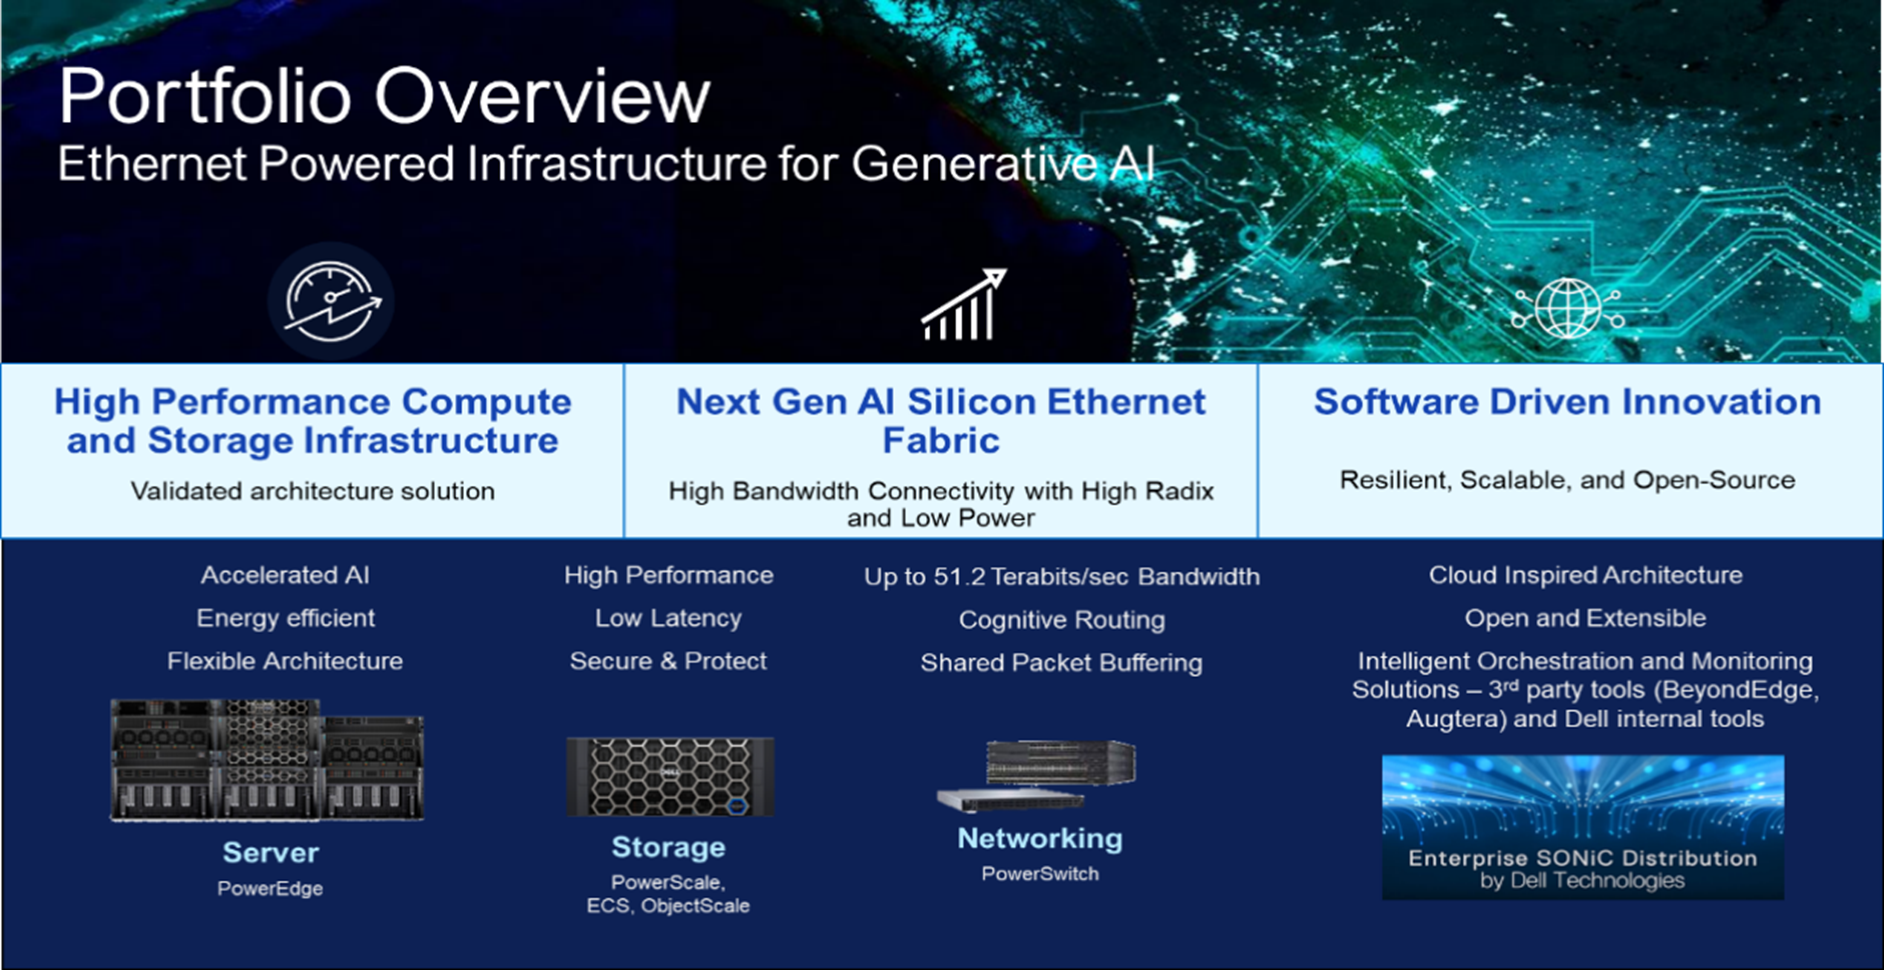 This graphic is a portfolio overview of Ethernet Powered Infrastructure